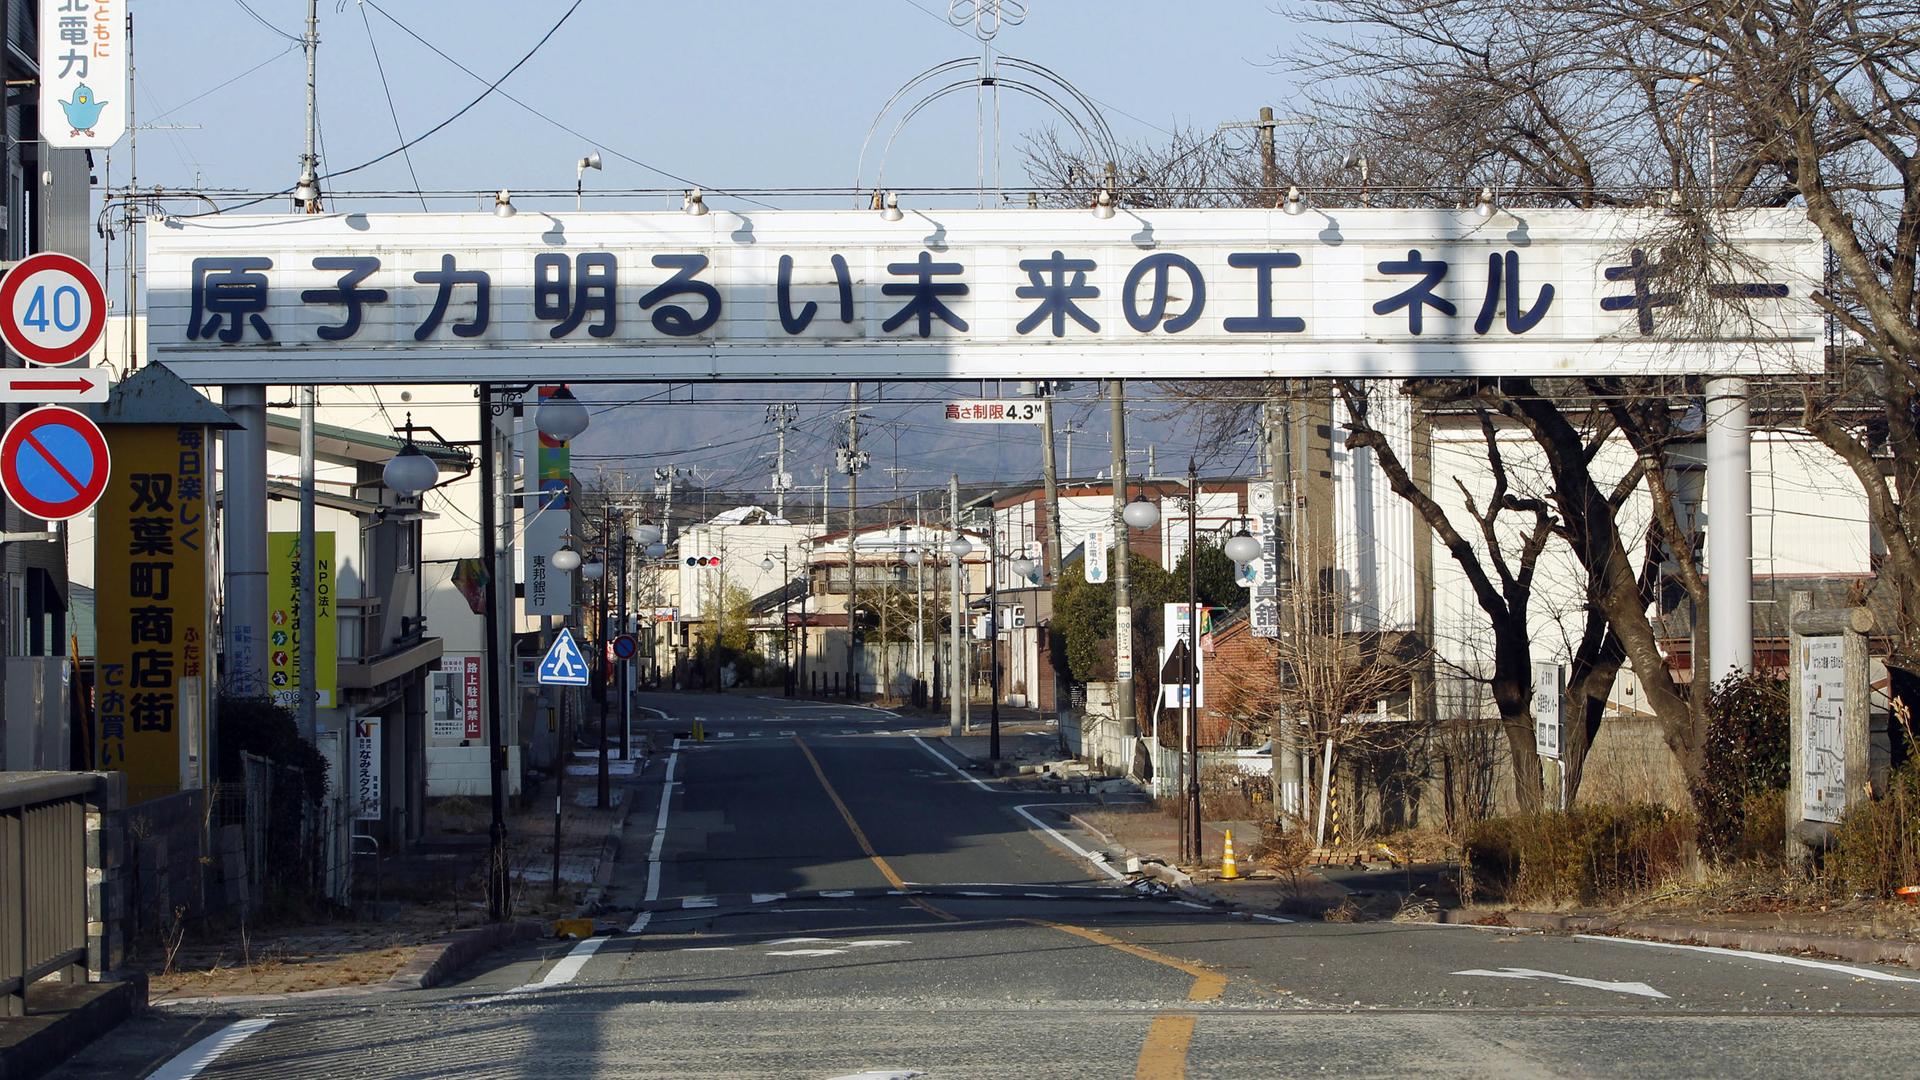 A sign reading "Nuclear Power - The Energy for a Better Future" hangs over a street in the town of Futaba, inside the 12-mile radius exclusion zone around Japan’s crippled Fukushima Daiichi nuclear power plant in a 2012 photo.